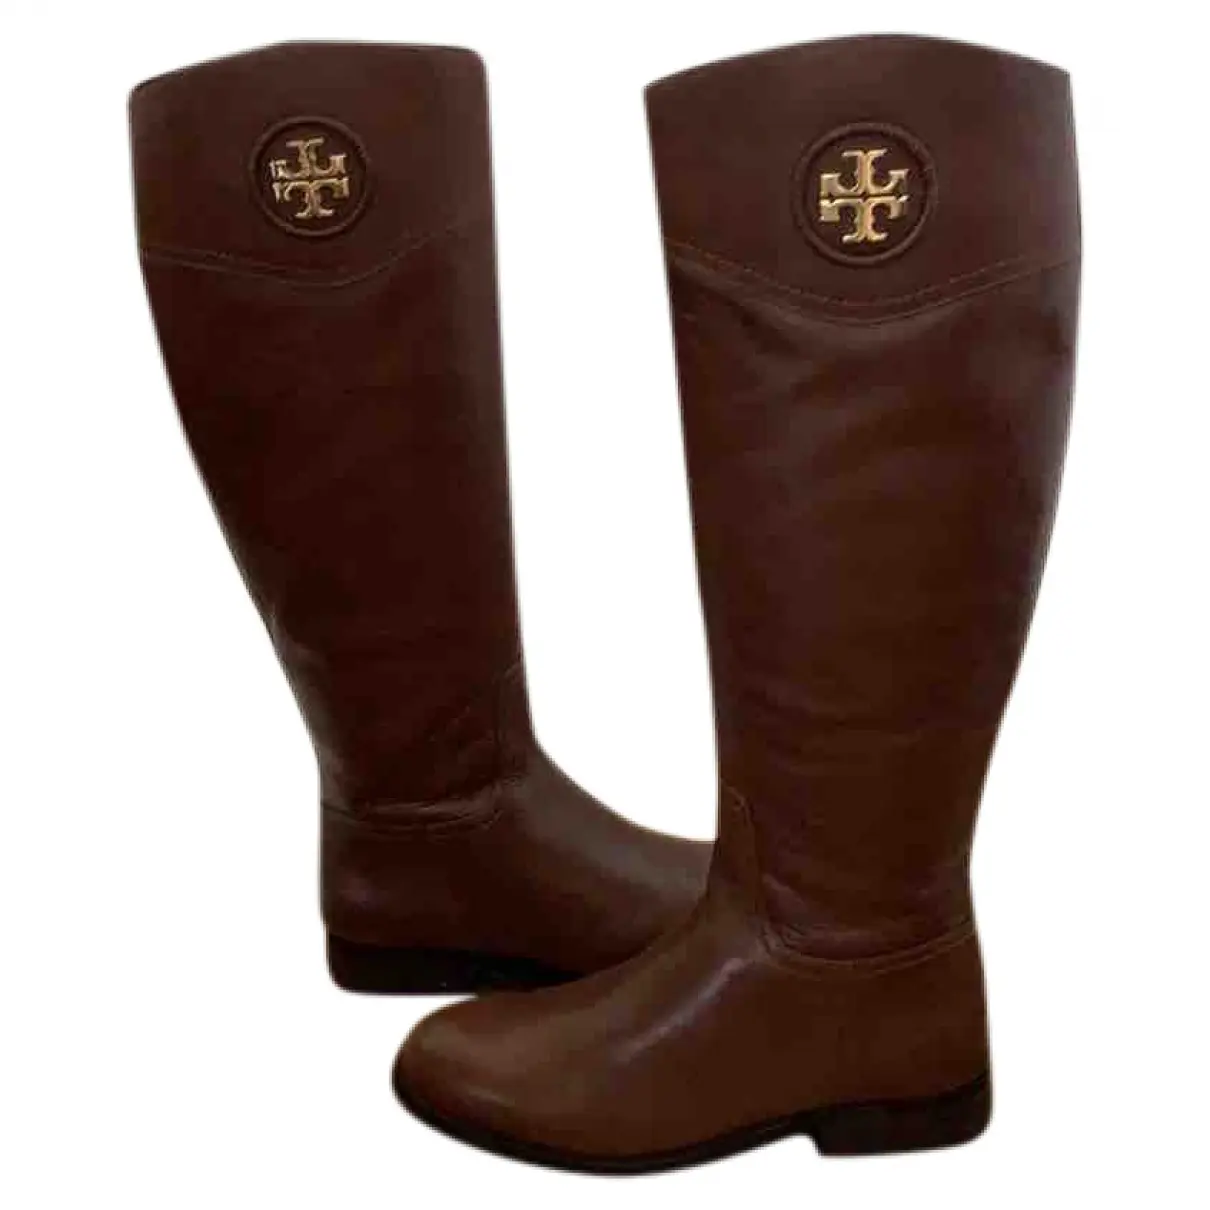 Leather riding boots Tory Burch